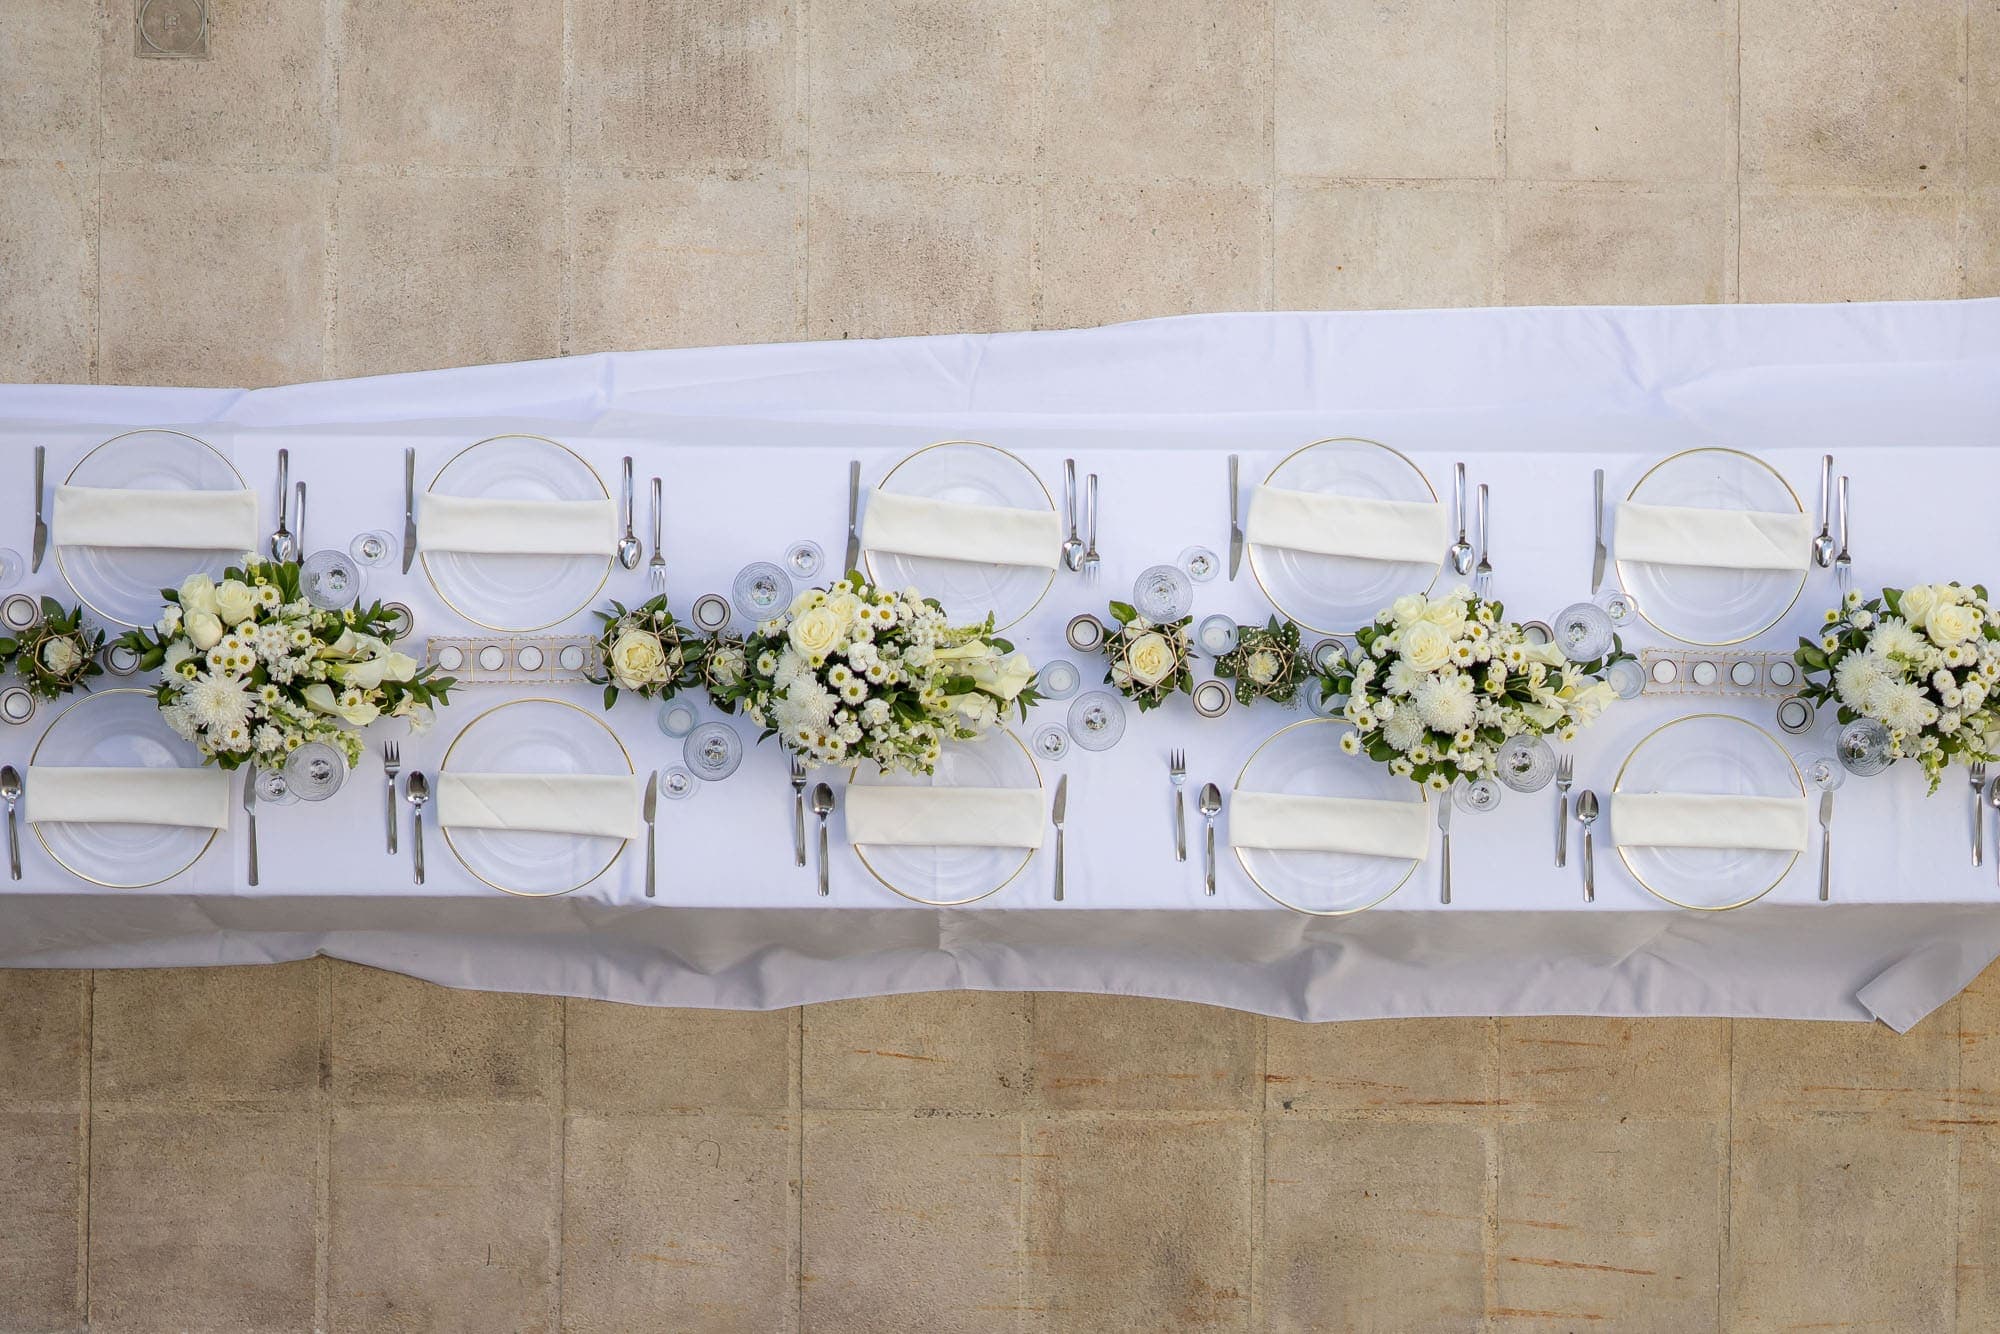 Overhead image of the reception table